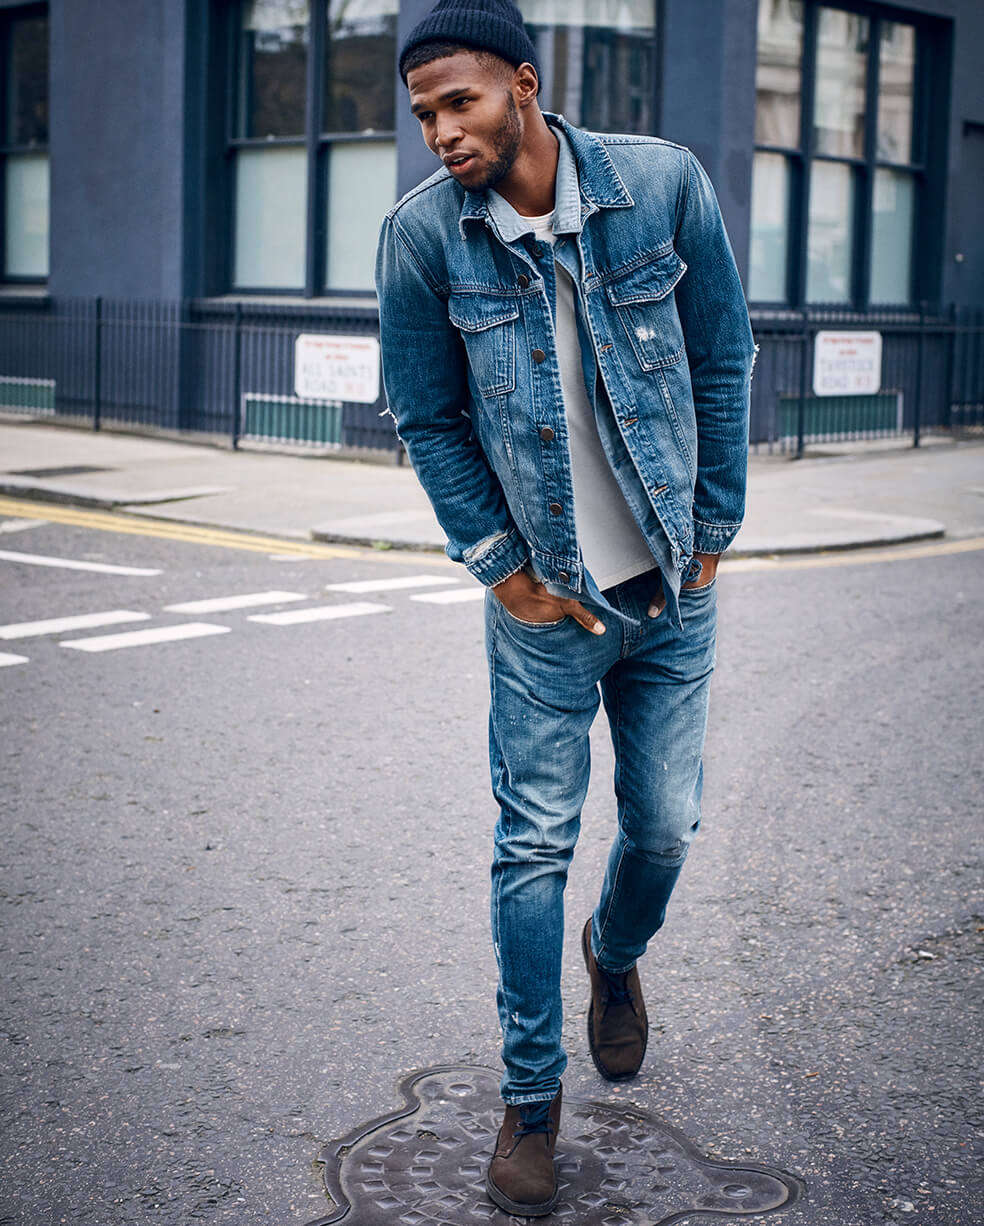 The men's guide to stand-out denim